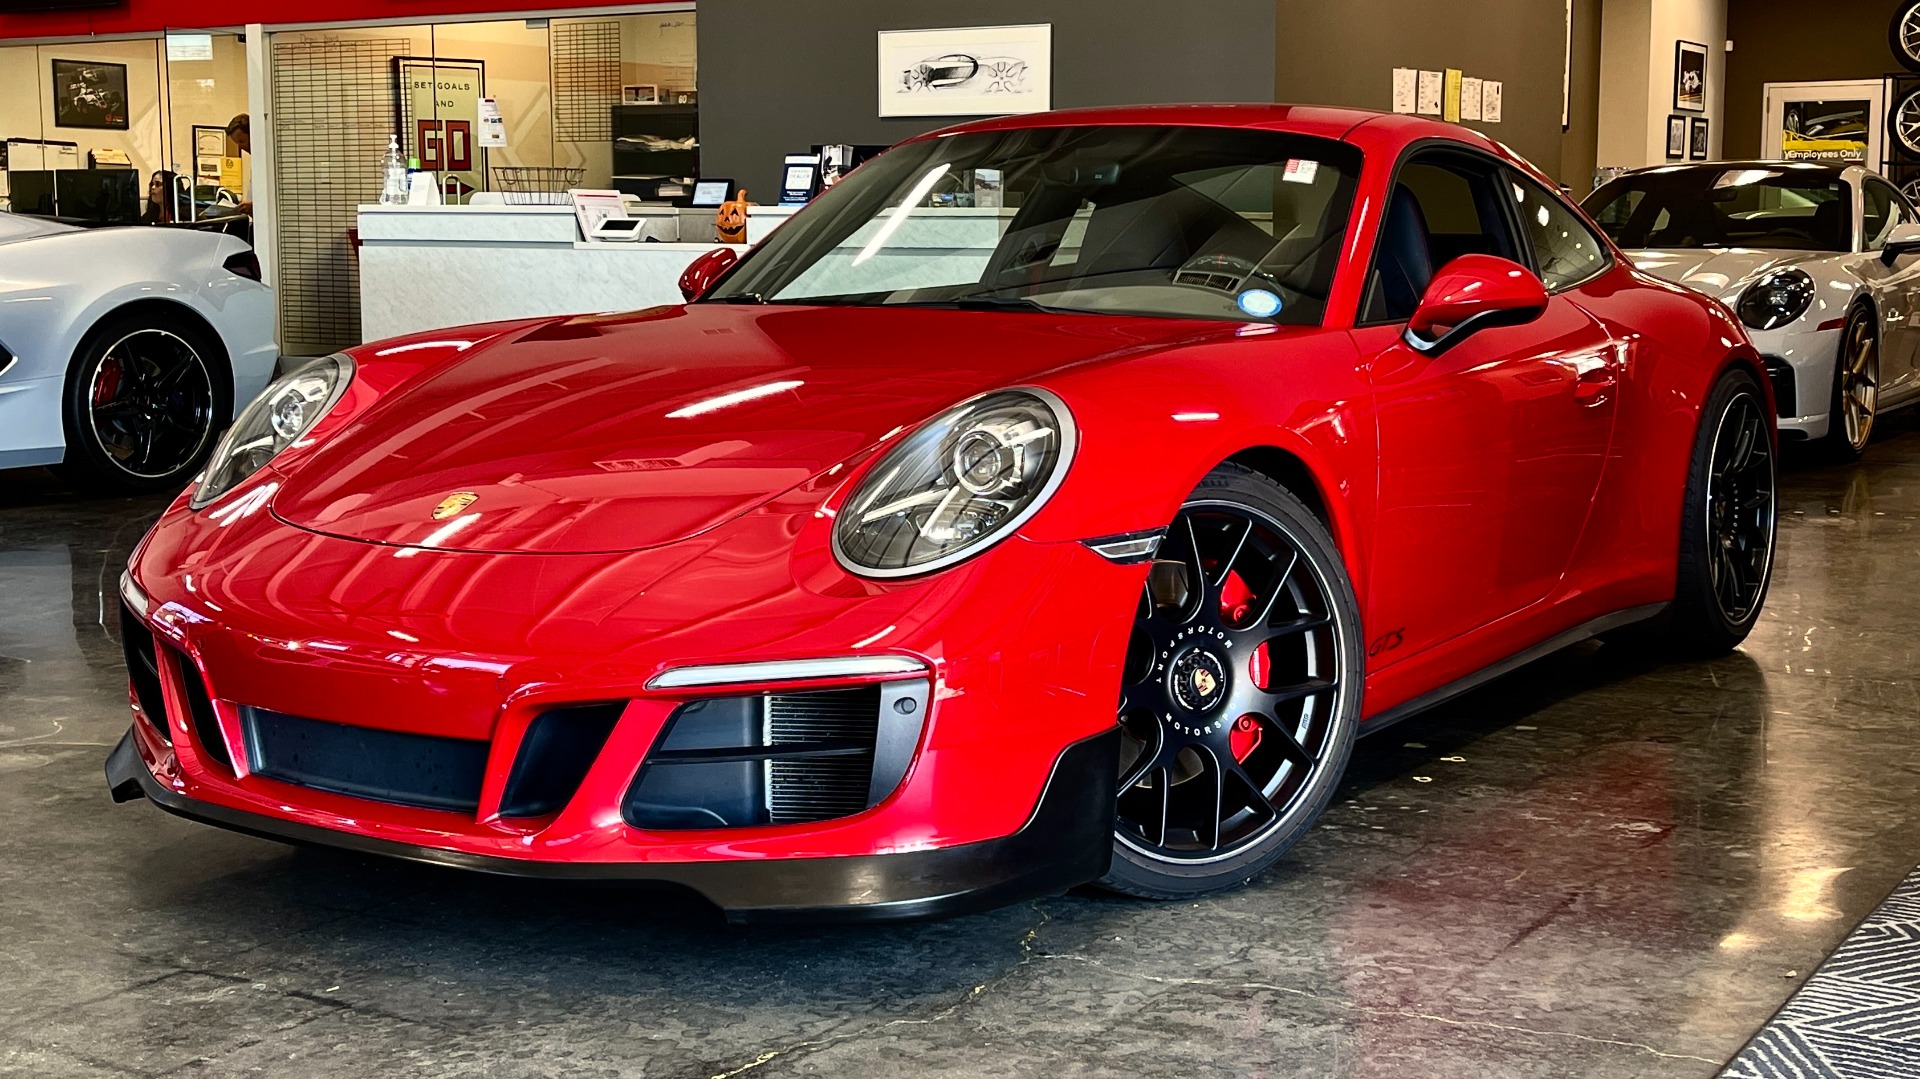 Used 2019 Porsche 911 Carrera GTS / TITANIUM EXHAUST / CARBON FIBER / TECHART SPRINGS / BBS WHEEL for sale $123,995 at Formula Imports in Charlotte NC 28227 1